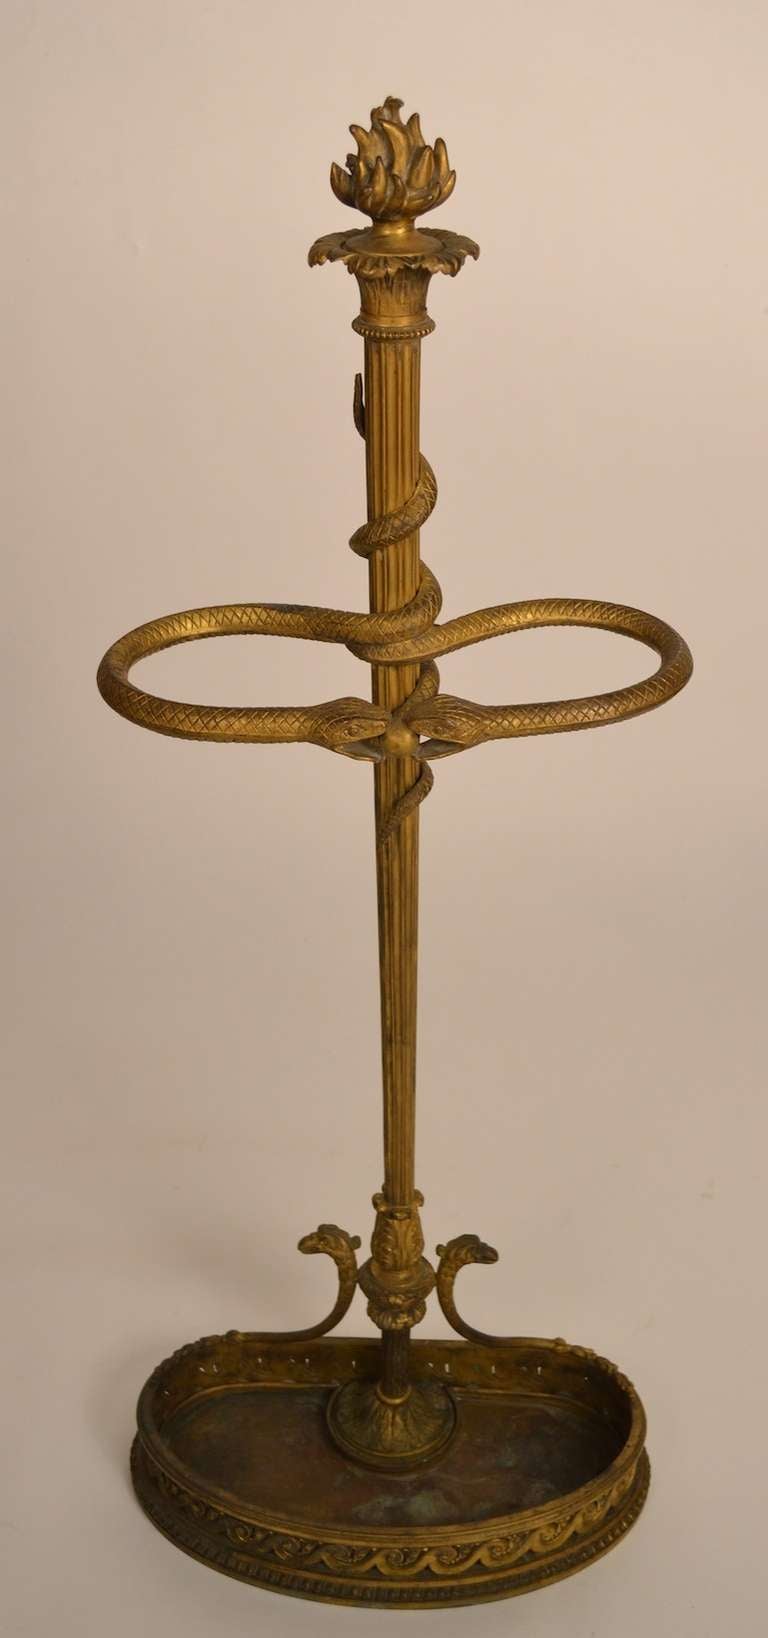 Solid Brass, probably French, 19th C Flame top, with fluted column which has a Snake wrapped around, and Griffen  head supports on the base. Fine quality crisp castings, amd fine detailed craftsmanship.